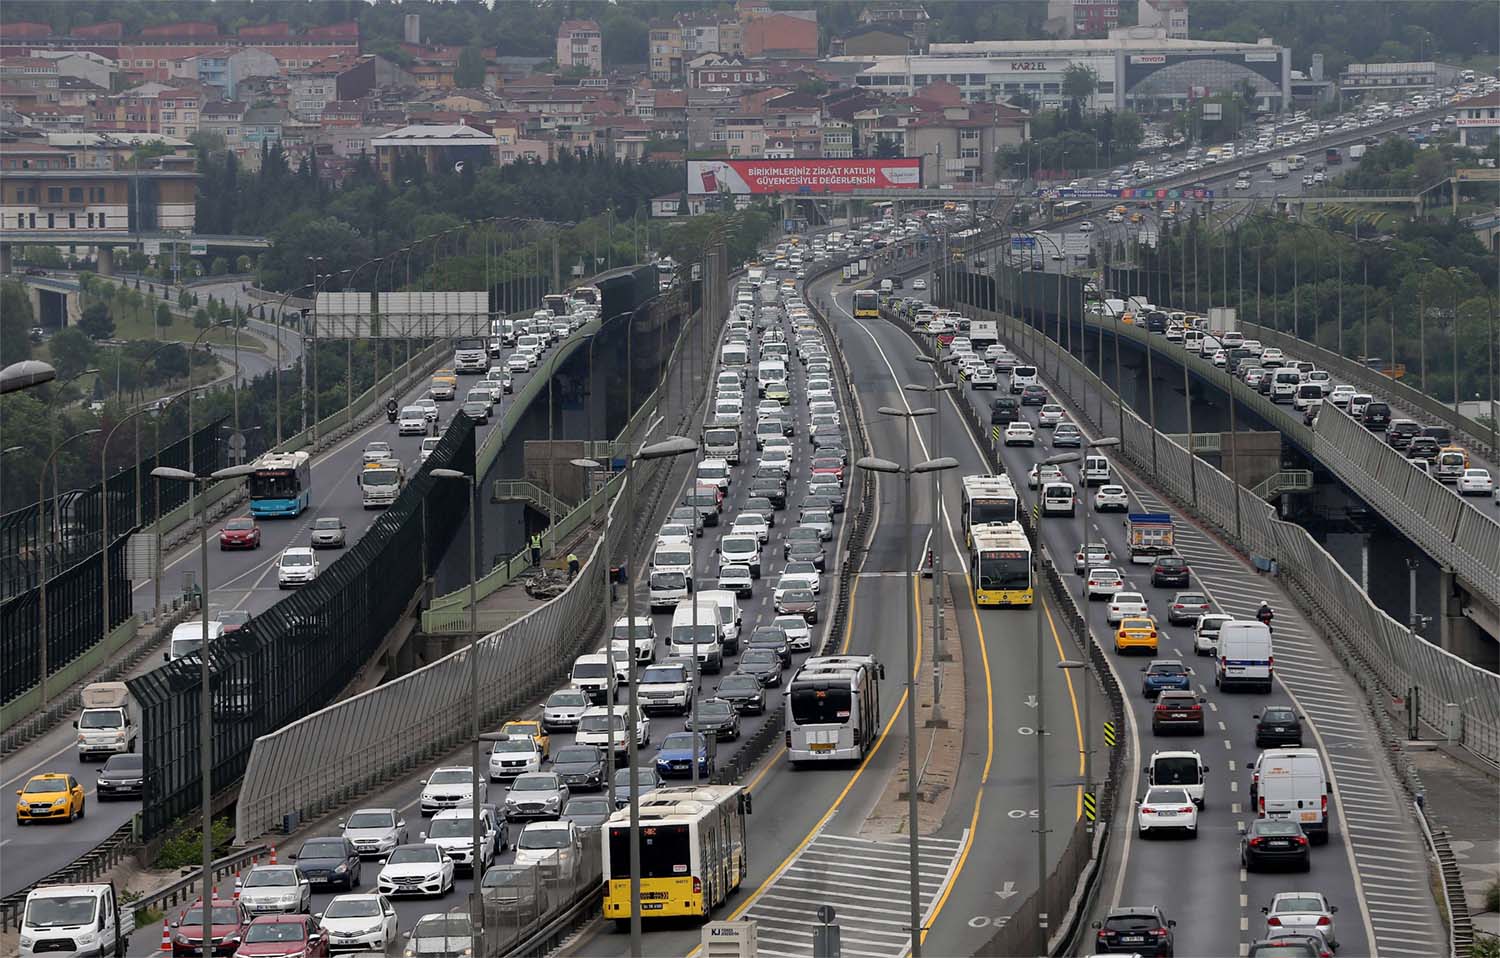 Turkey's greenhouse gas emissions stood at 523.9 million tonnes of CO2 equivalent in 2020